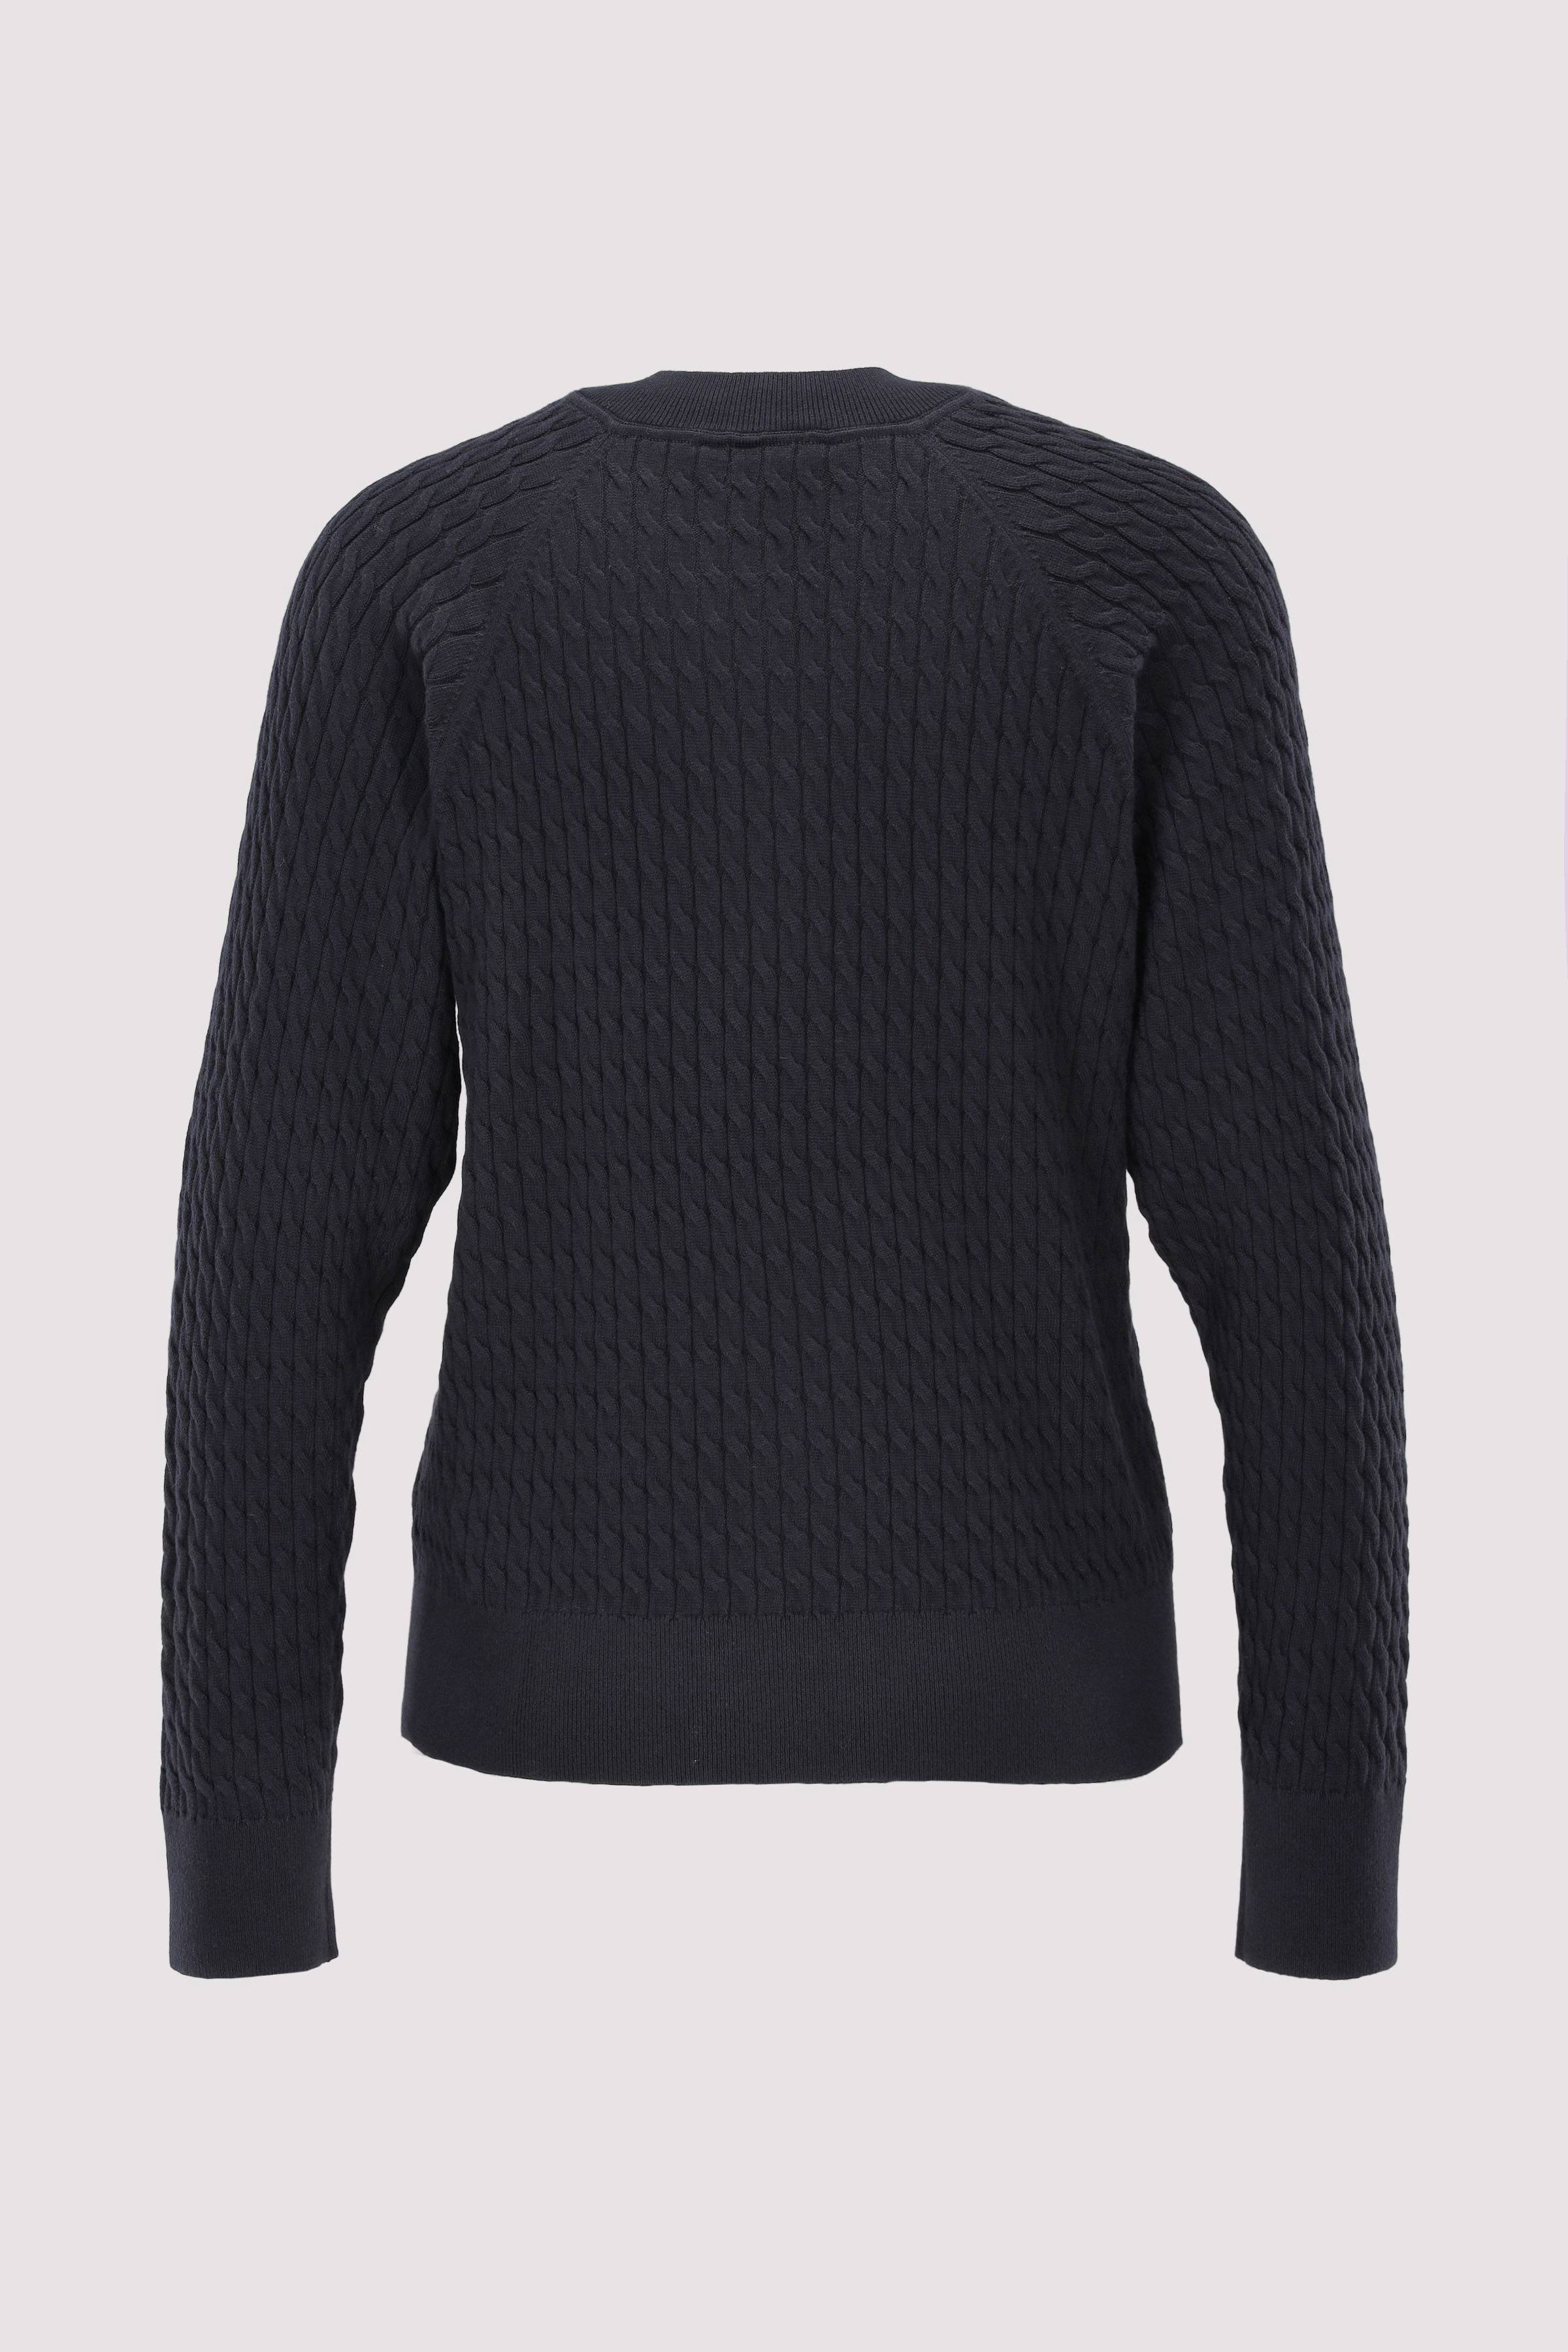 CO CABLE C-NK SWEATER